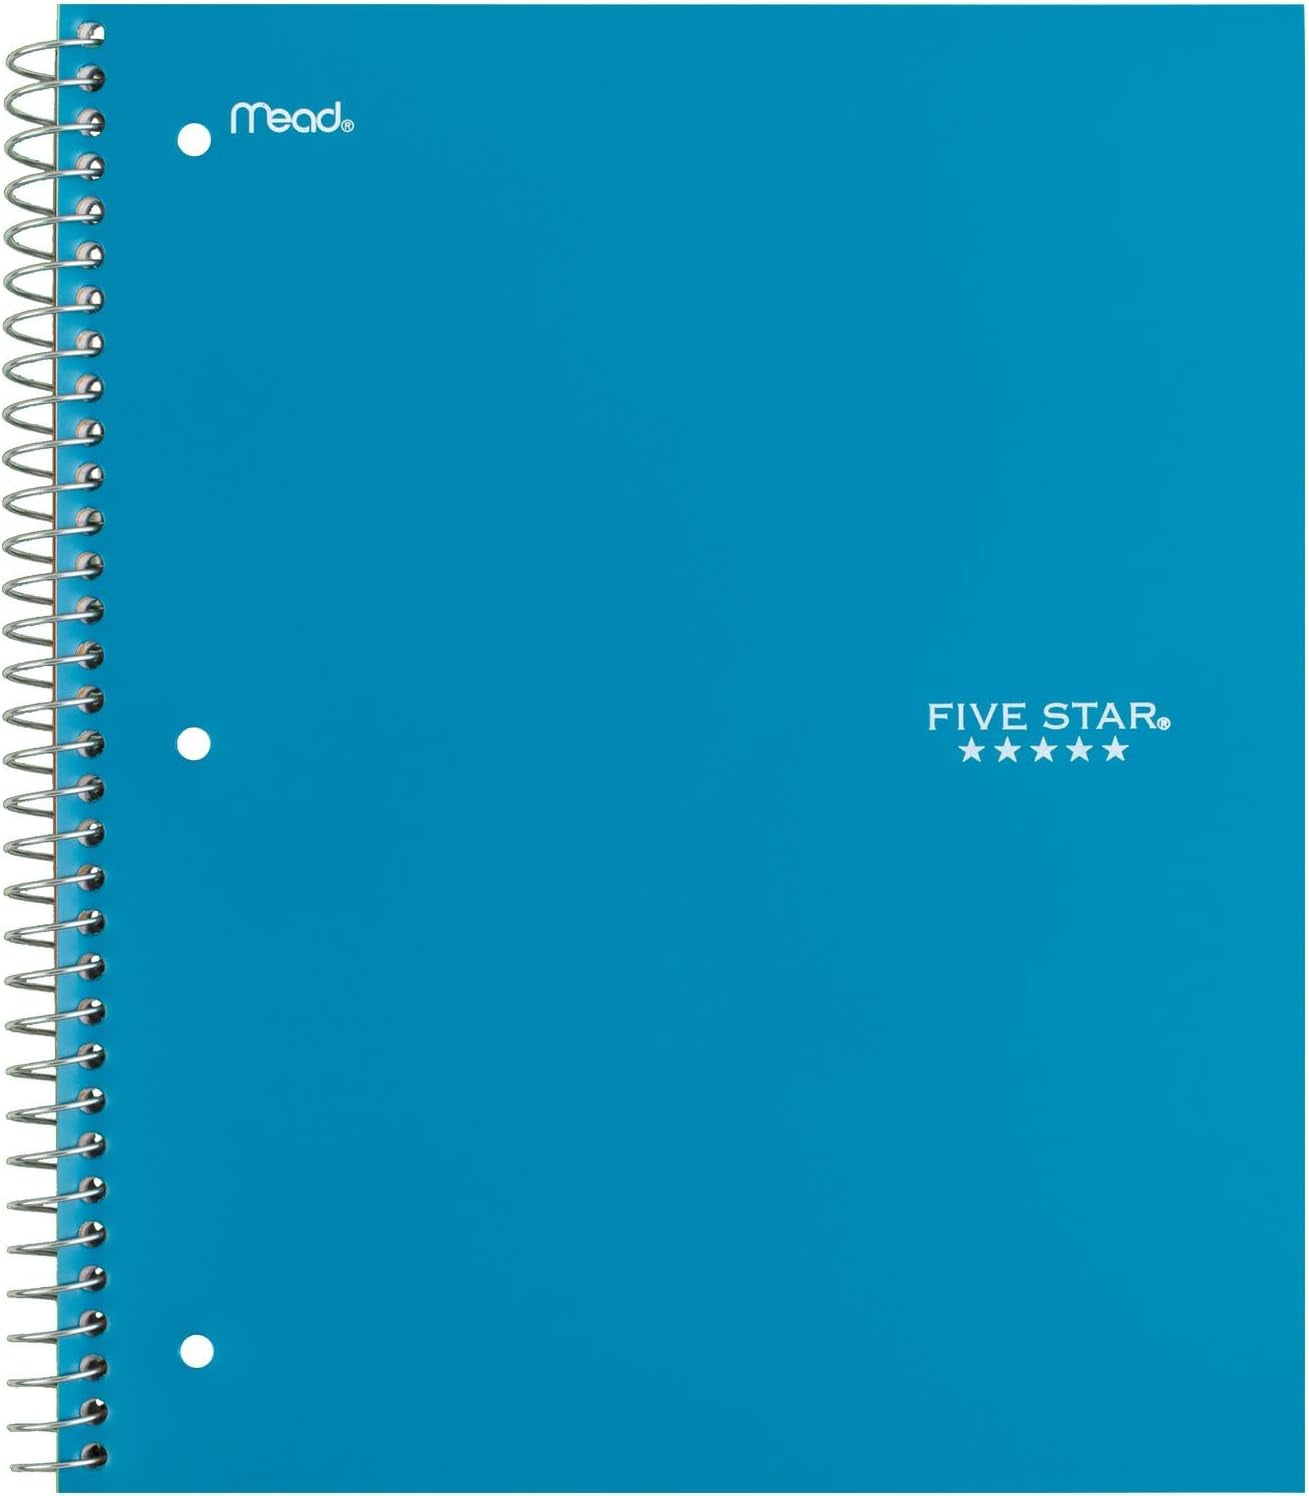 Spiral Notebook + Study App, 3 Subject, Wide Ruled Paper, 150 Sheets, 10-1/2" X 8" Sheet Size, Tidewater Blue (73184)